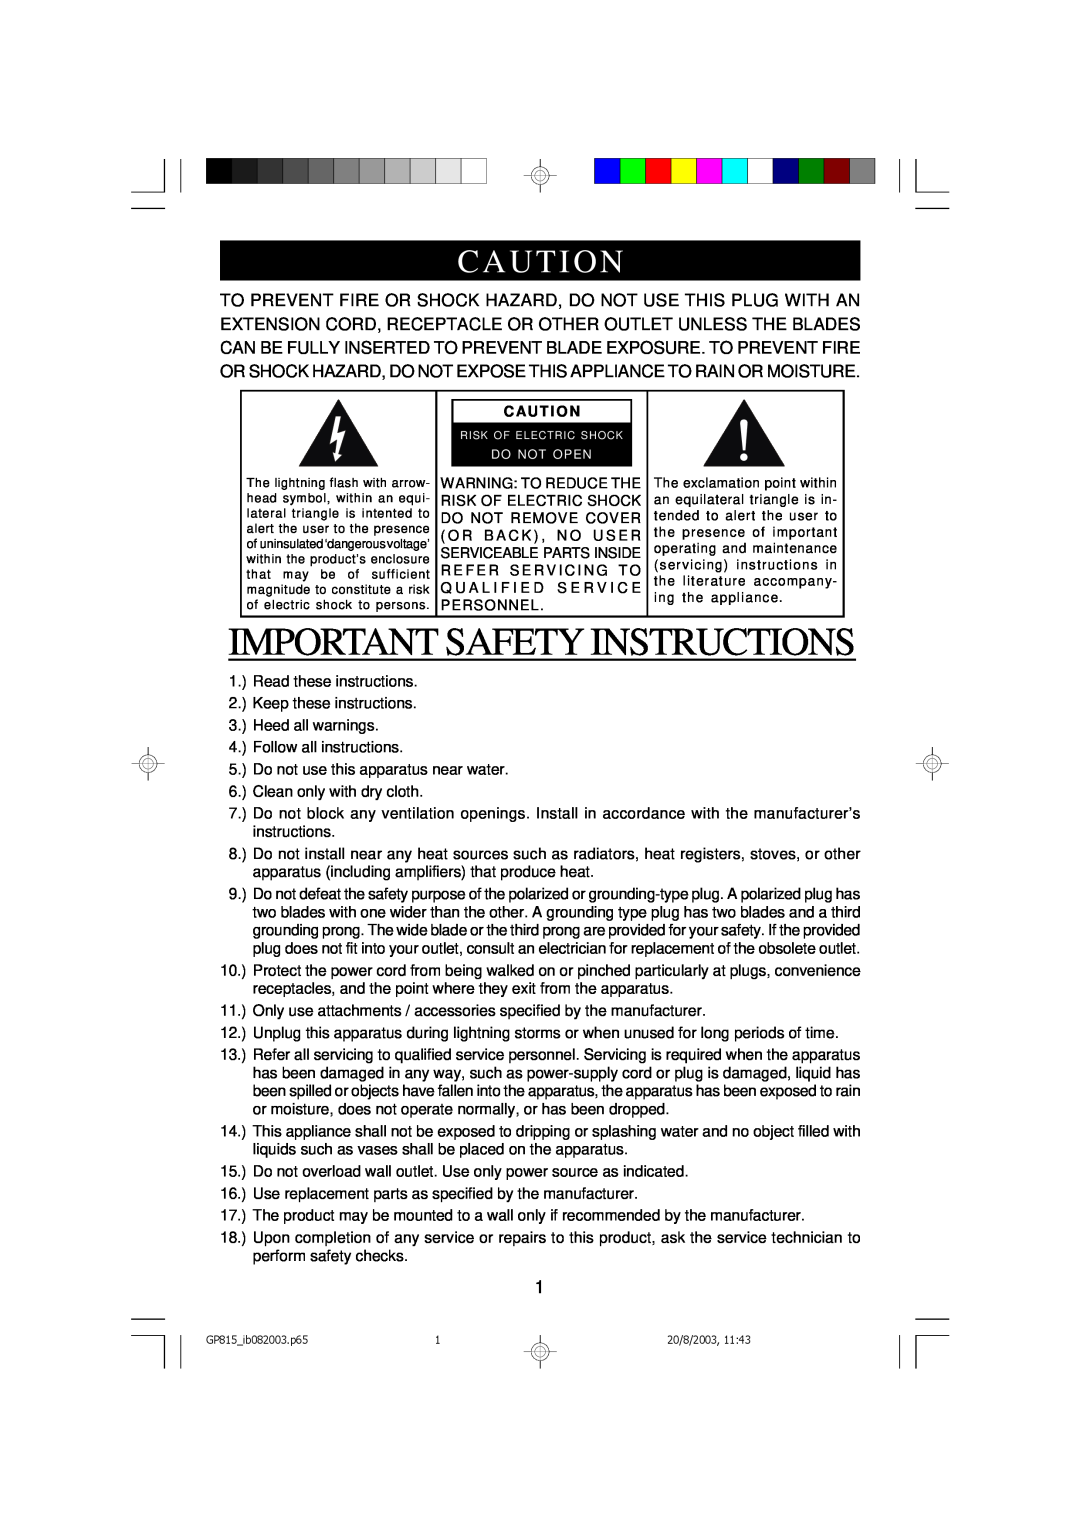 Emerson GP815 owner manual Important Safety Instructions, Caut I On, Caut I O N 